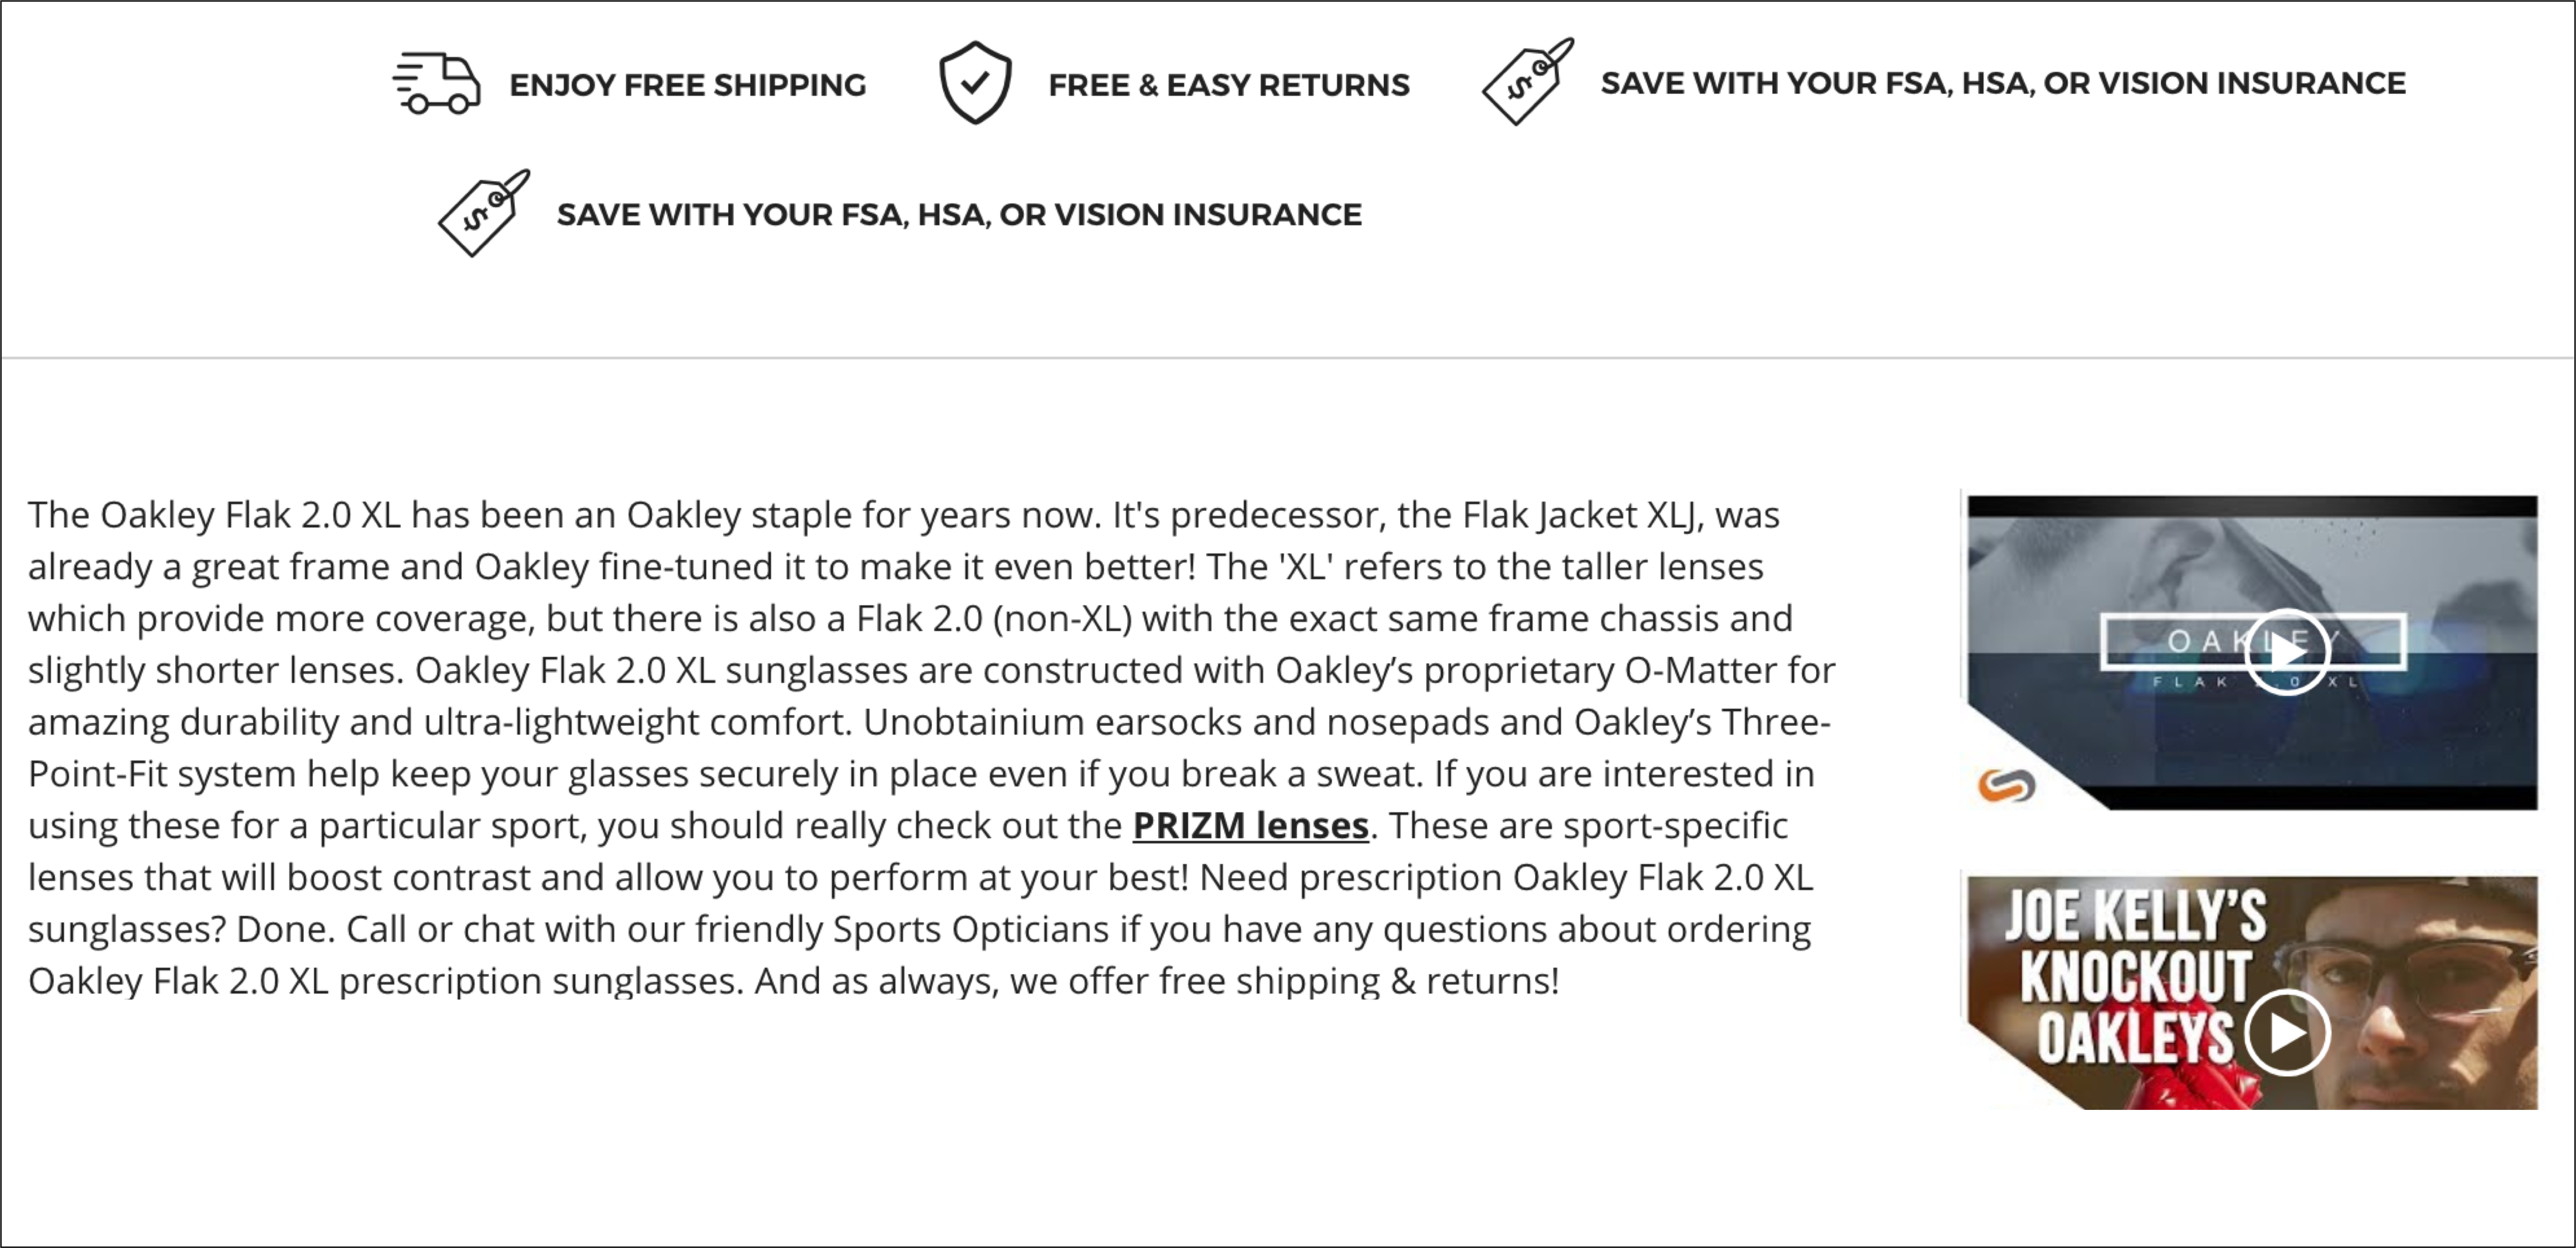 Oakley product description, which isn't very readable.